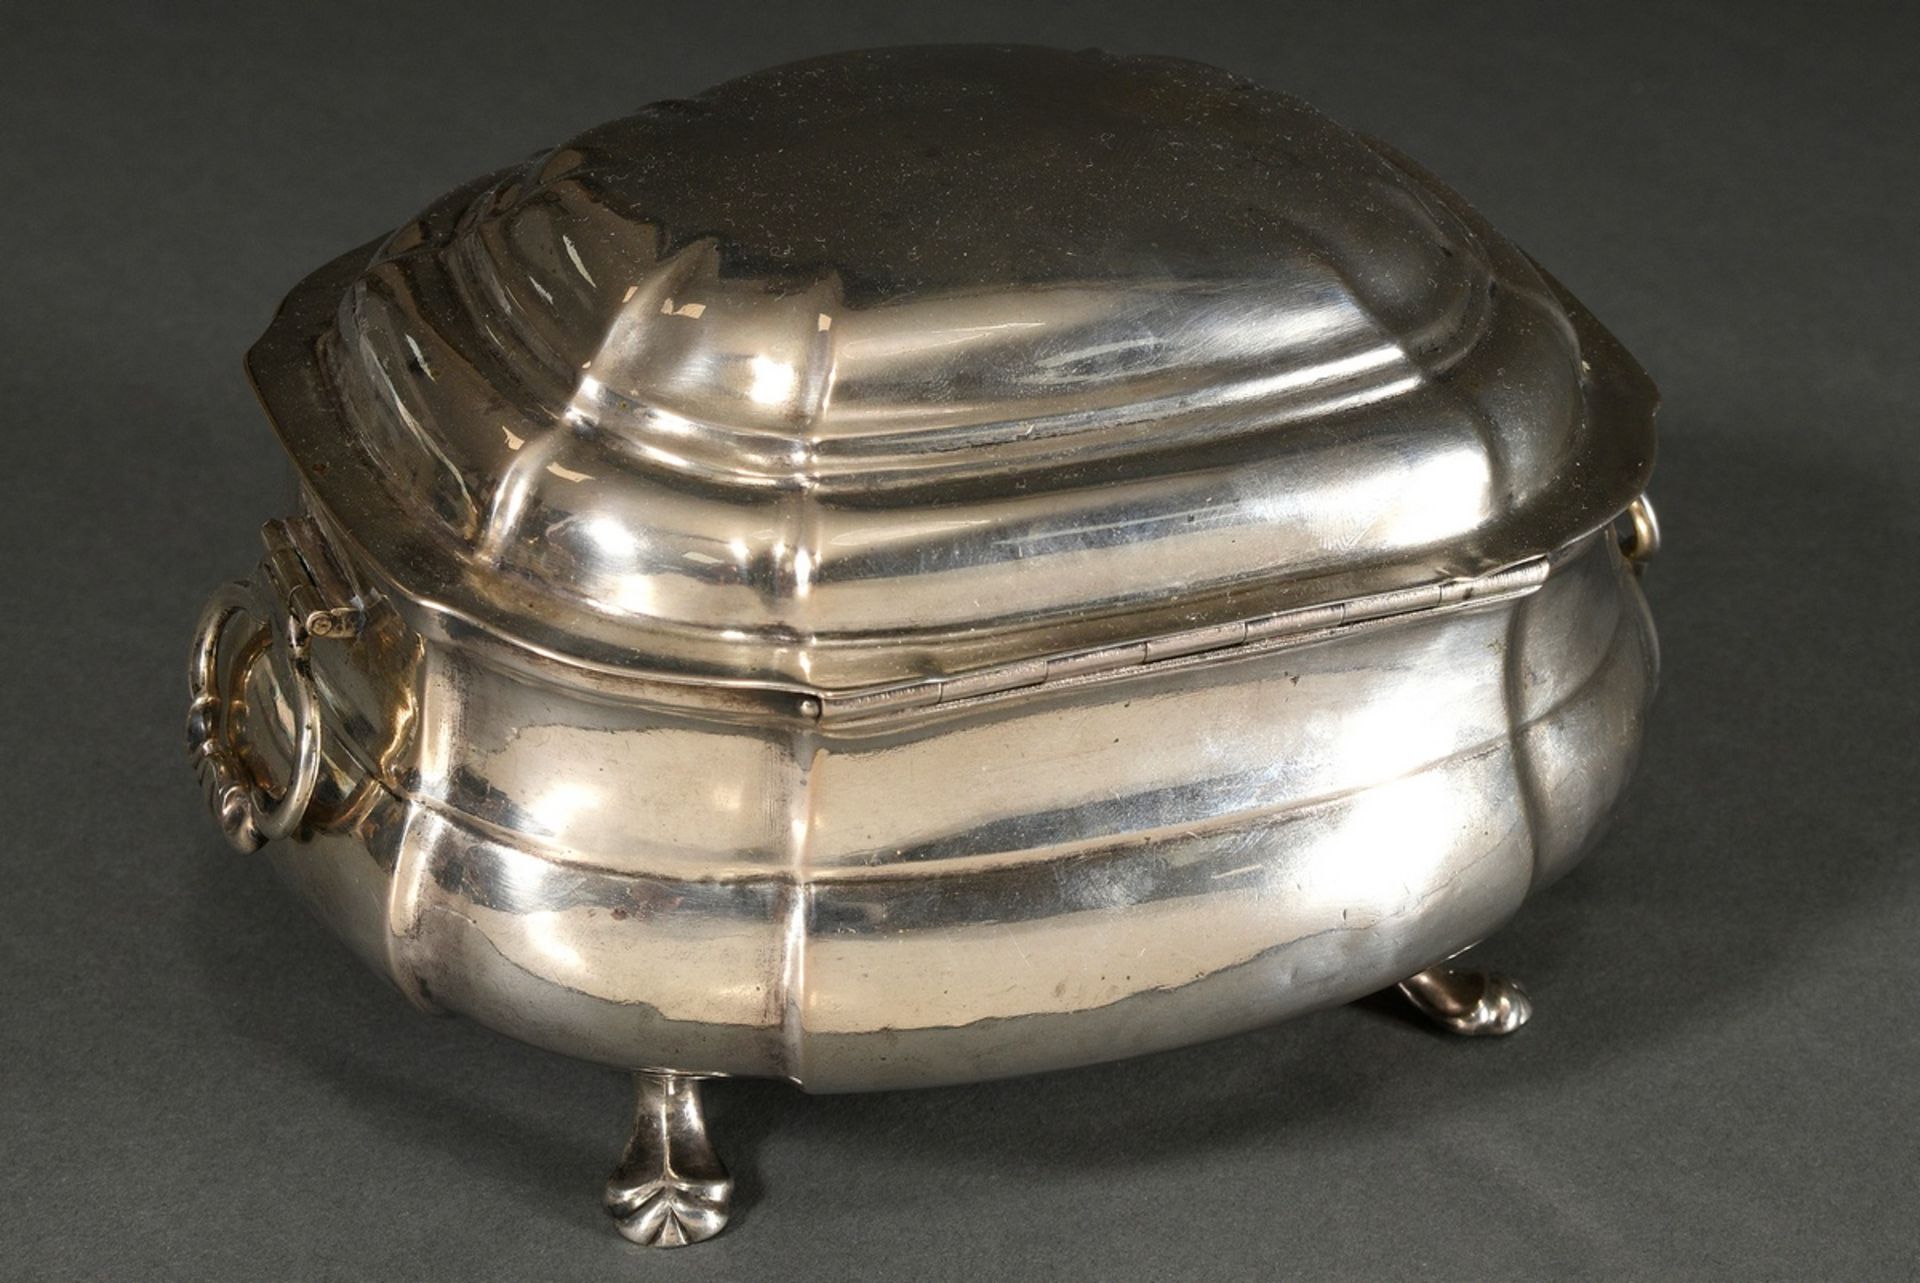 Baroque sugar bowl with oval cambered body and four curved feet, domed lid and wall with quadruple  - Image 2 of 6